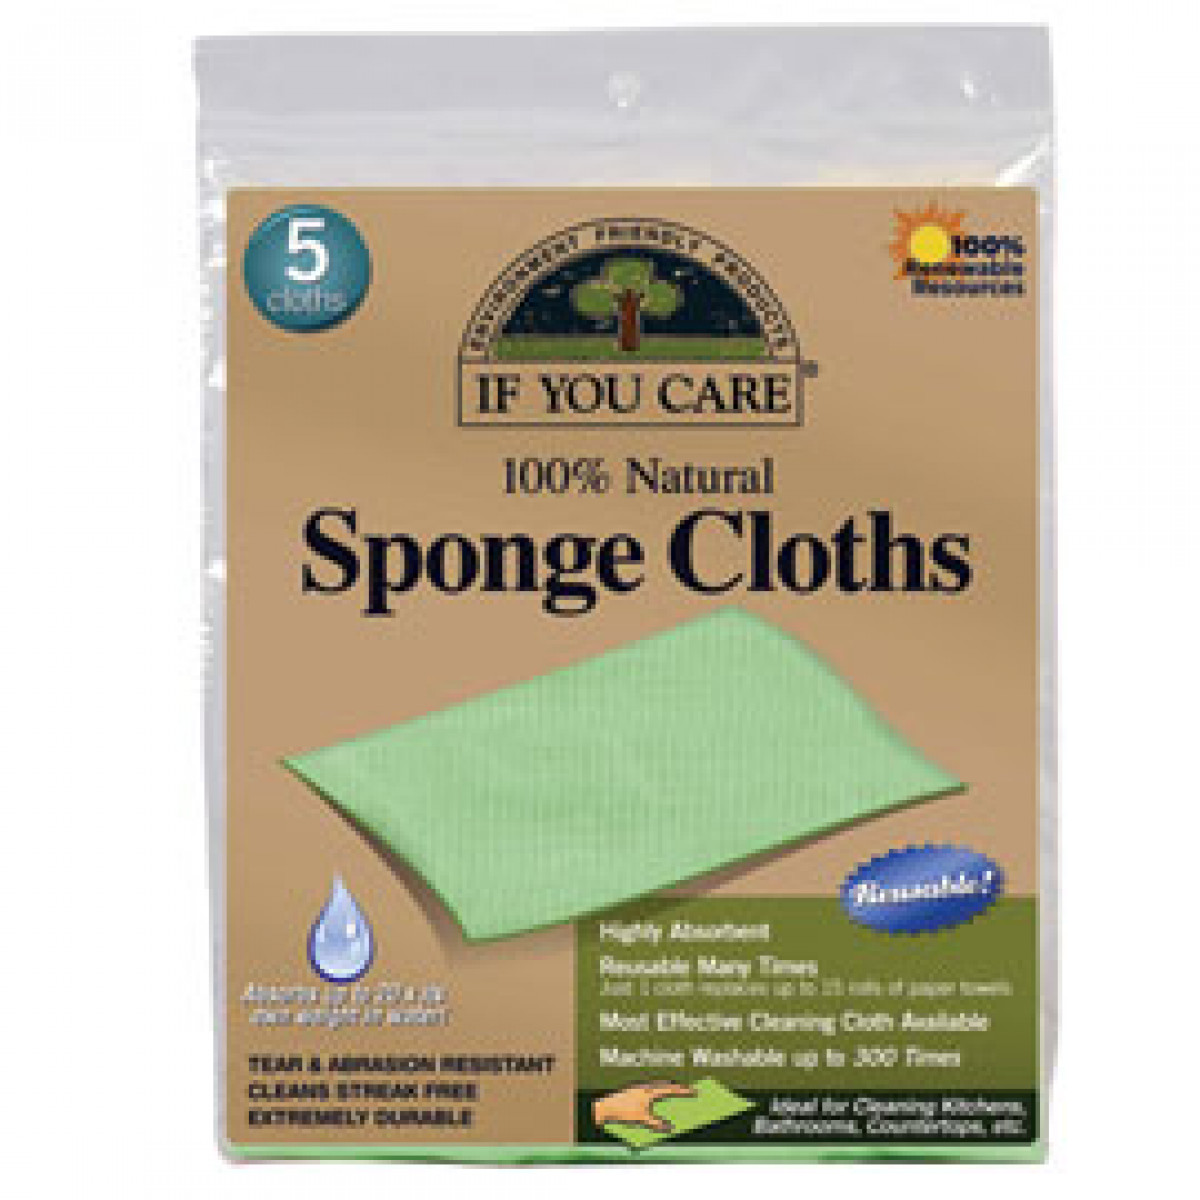 Product picture for Sponge Cloths - 100% Natural